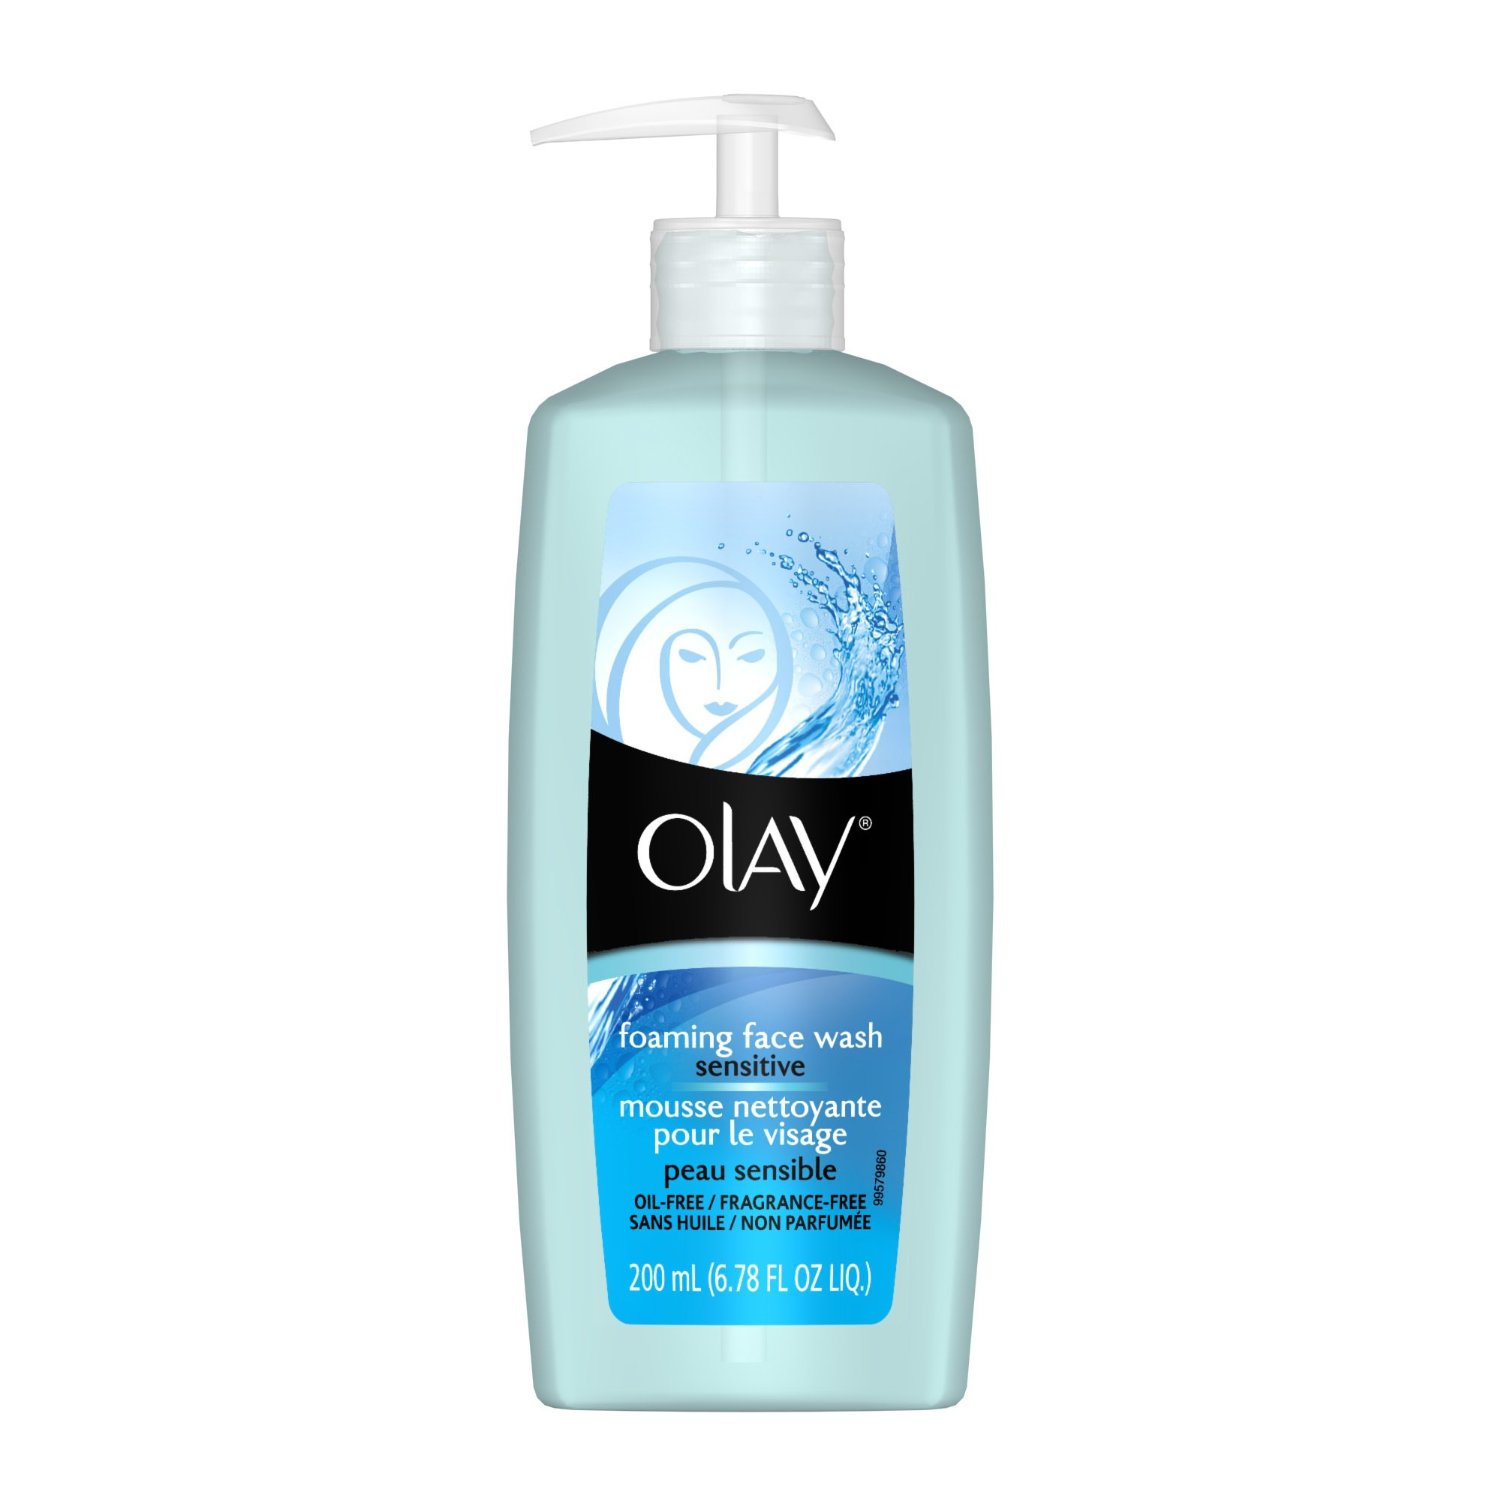 Olay Sensitive Foaming Face Wash (Pack of 2) $3.48